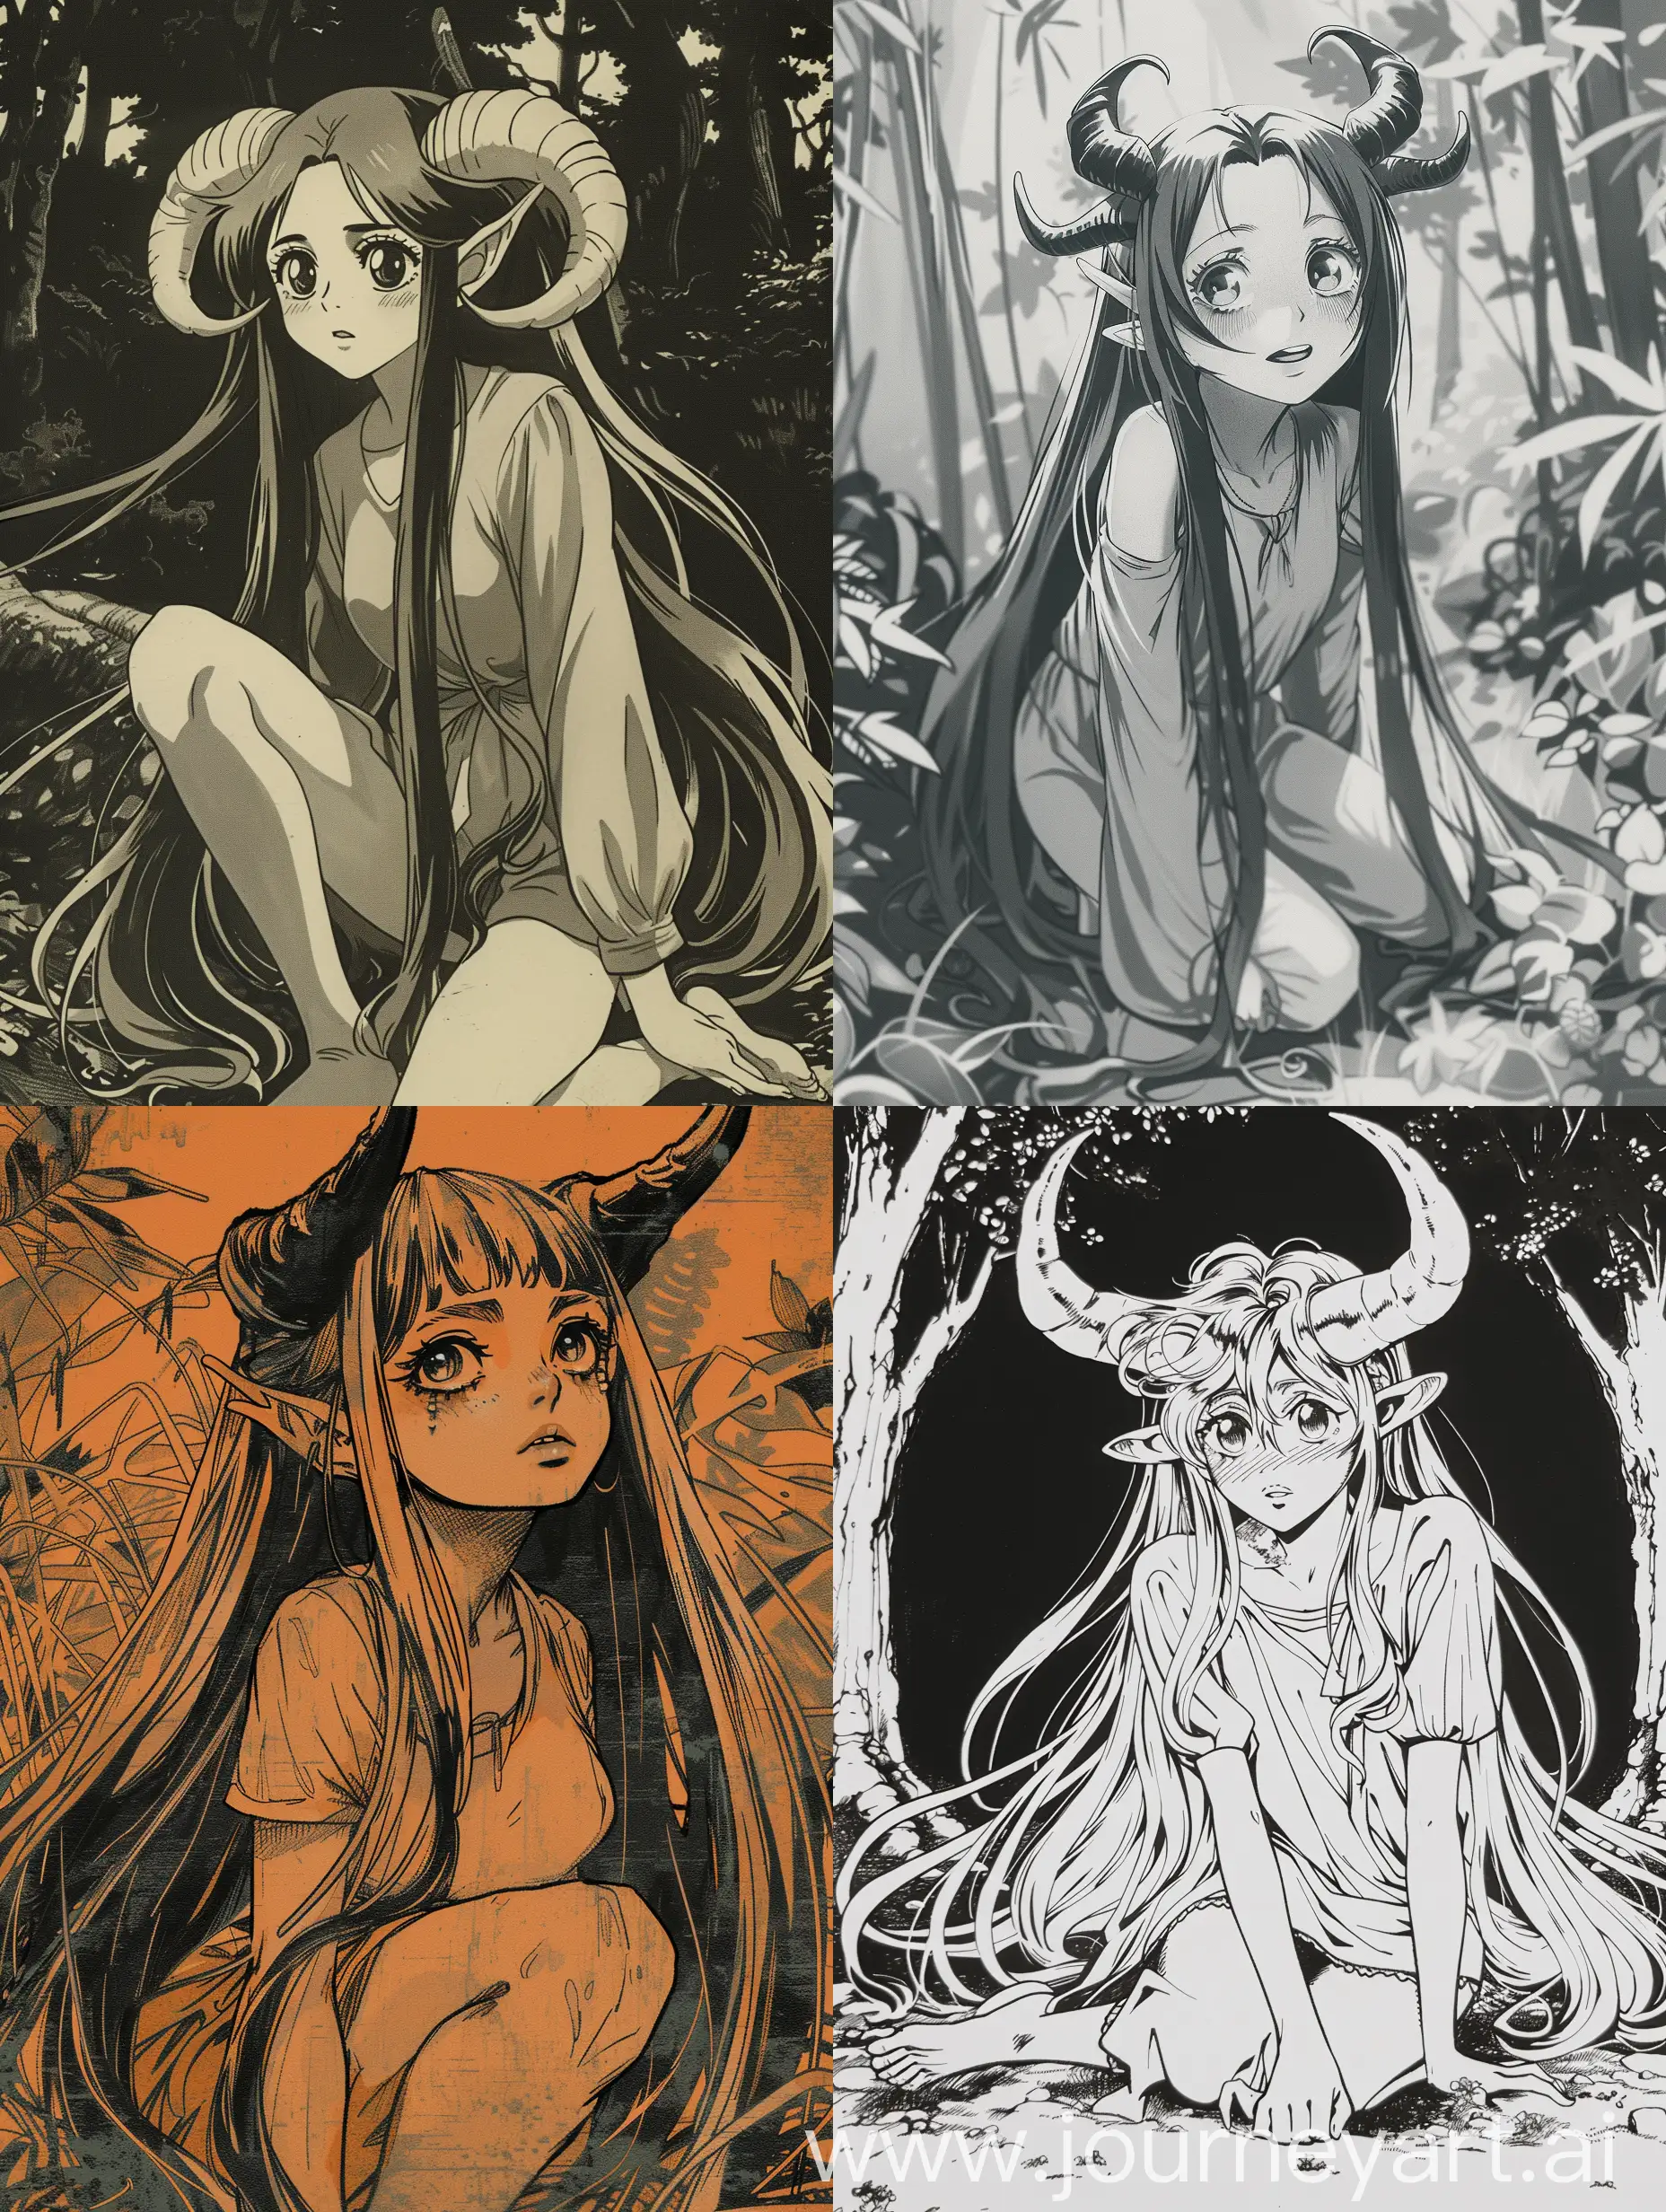 Enchanting-Devil-Woman-with-Innocent-Mischief-in-a-GhibliInspired-Scene